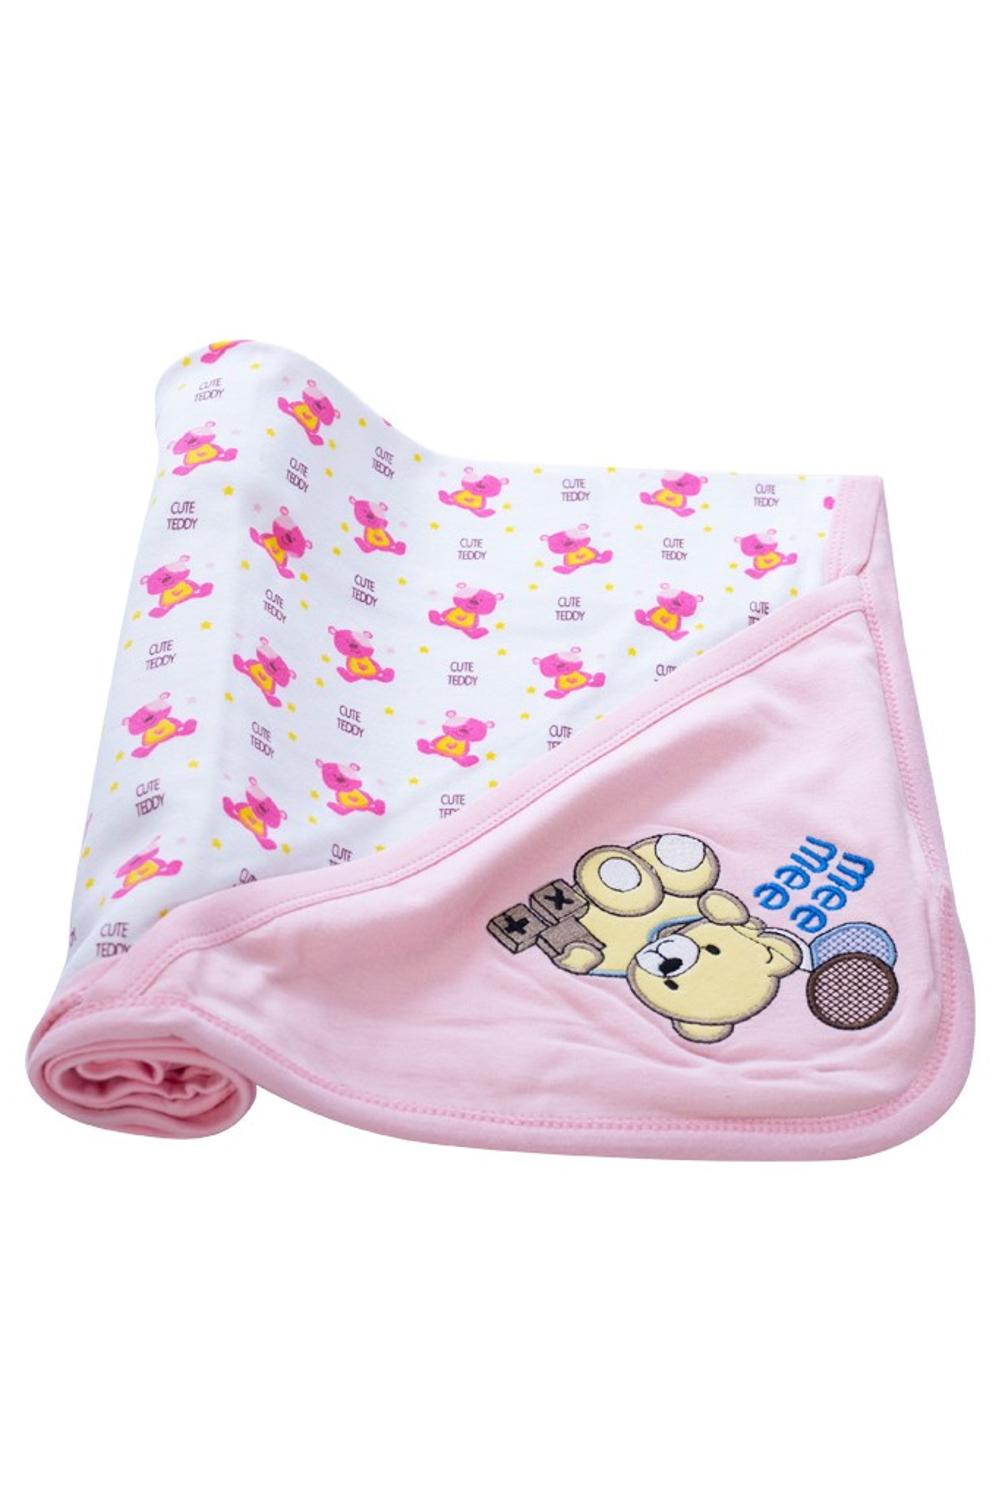 Mee Mee Warm & Soft Wrapper Blanket with Hood (Pink)